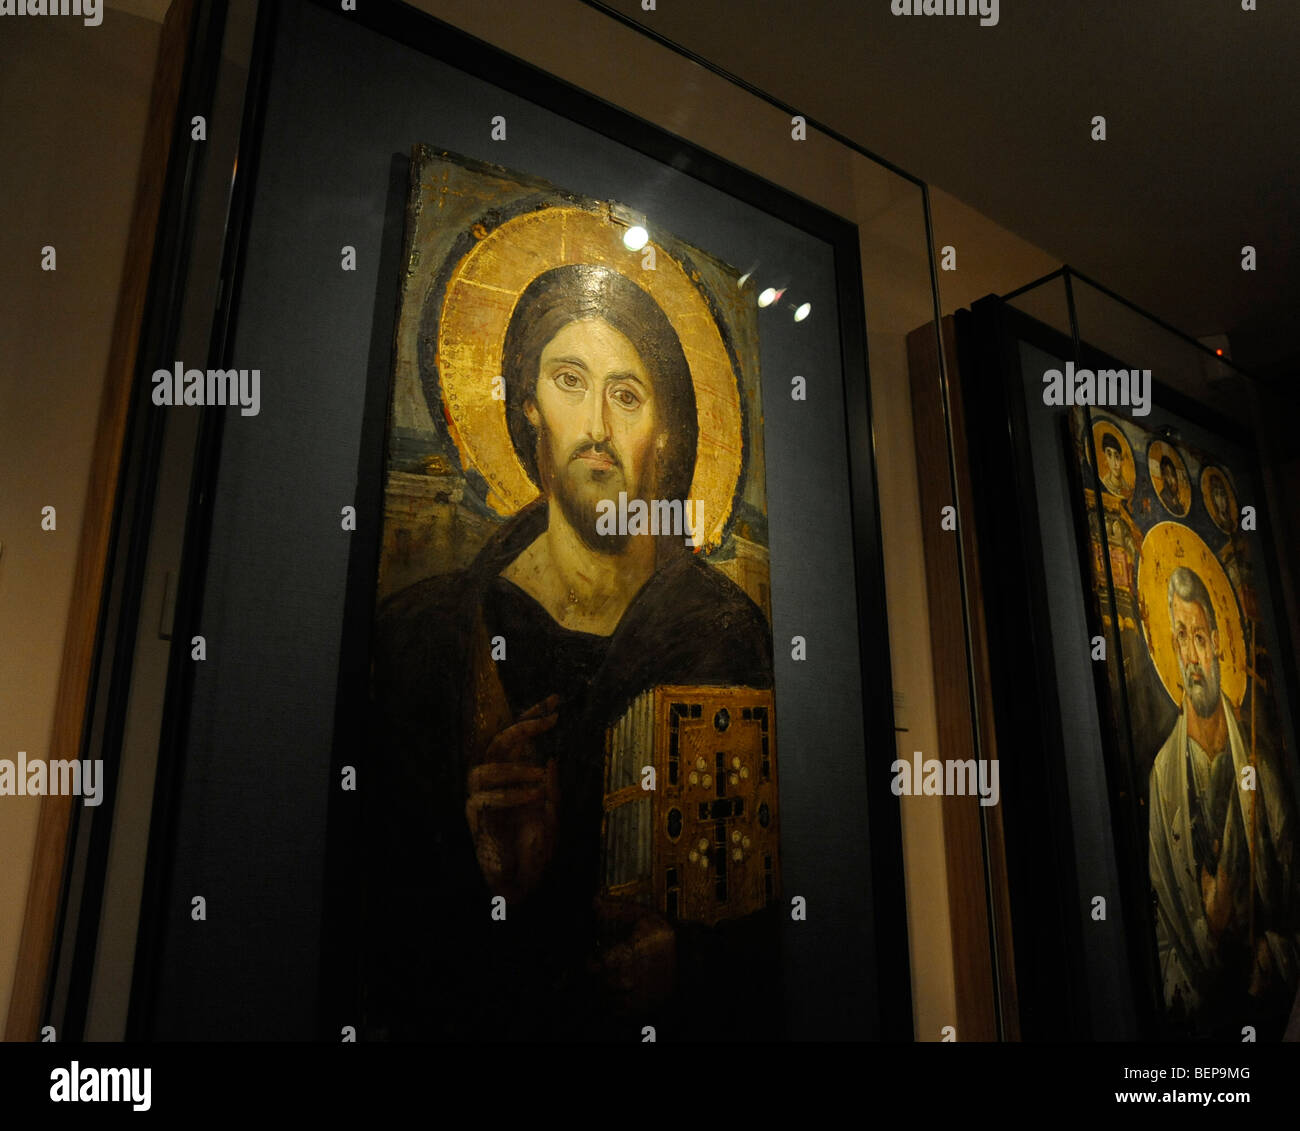 The Christ Pantokrator icon dated 5th Century in the museum in St. Catherine's monastery in Sinai Egypt Stock Photo